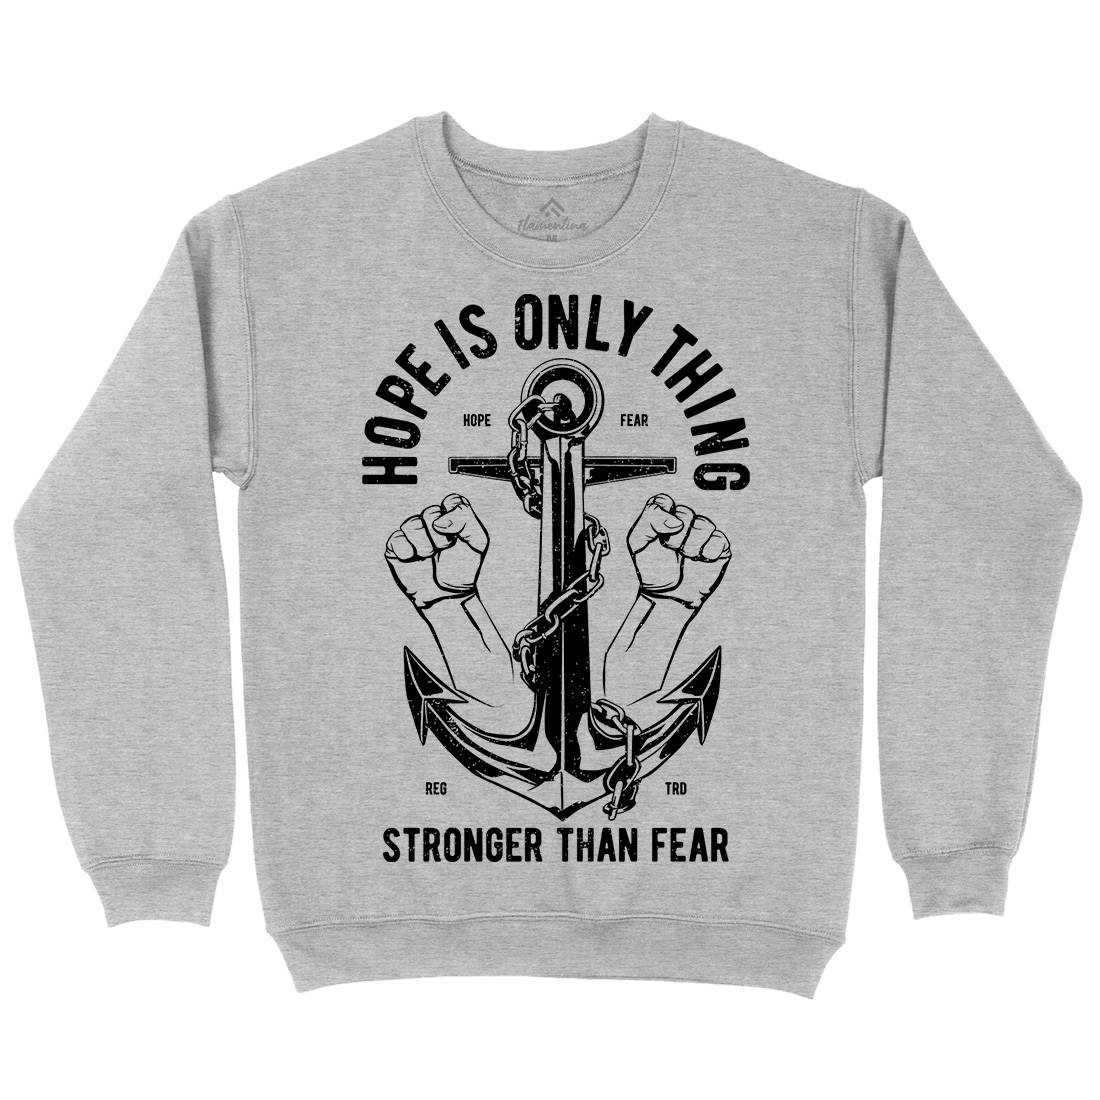 Hope Is Only Thing Kids Crew Neck Sweatshirt Quotes A685